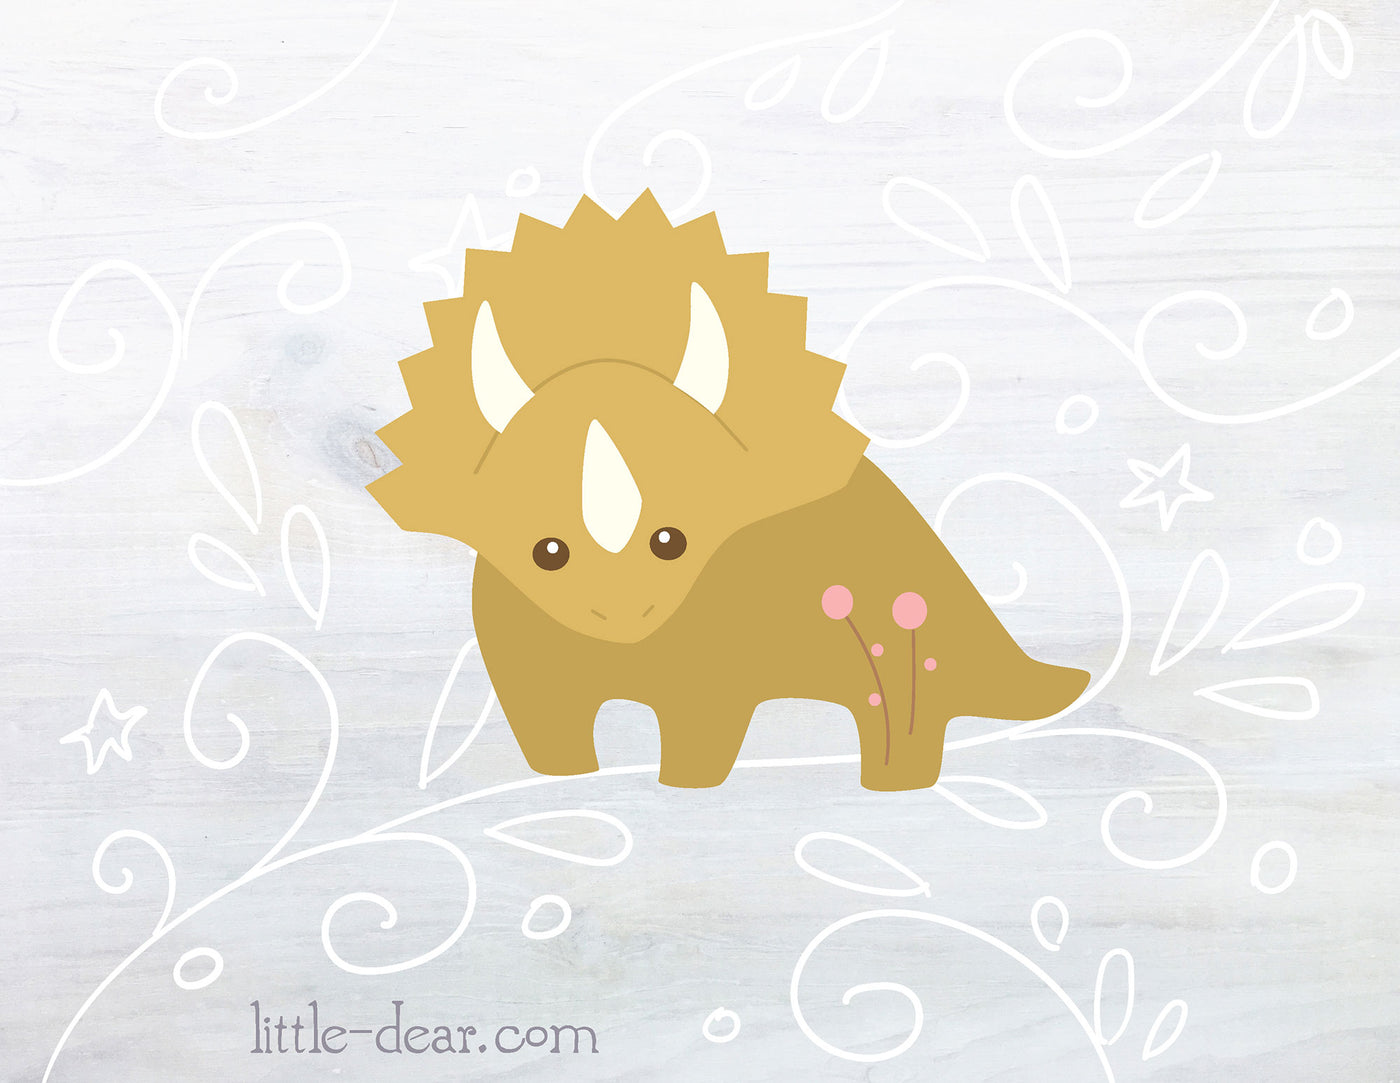 SVG Triceratops cute dinosaur file for Cricut, Silhouette, PNG, JPG